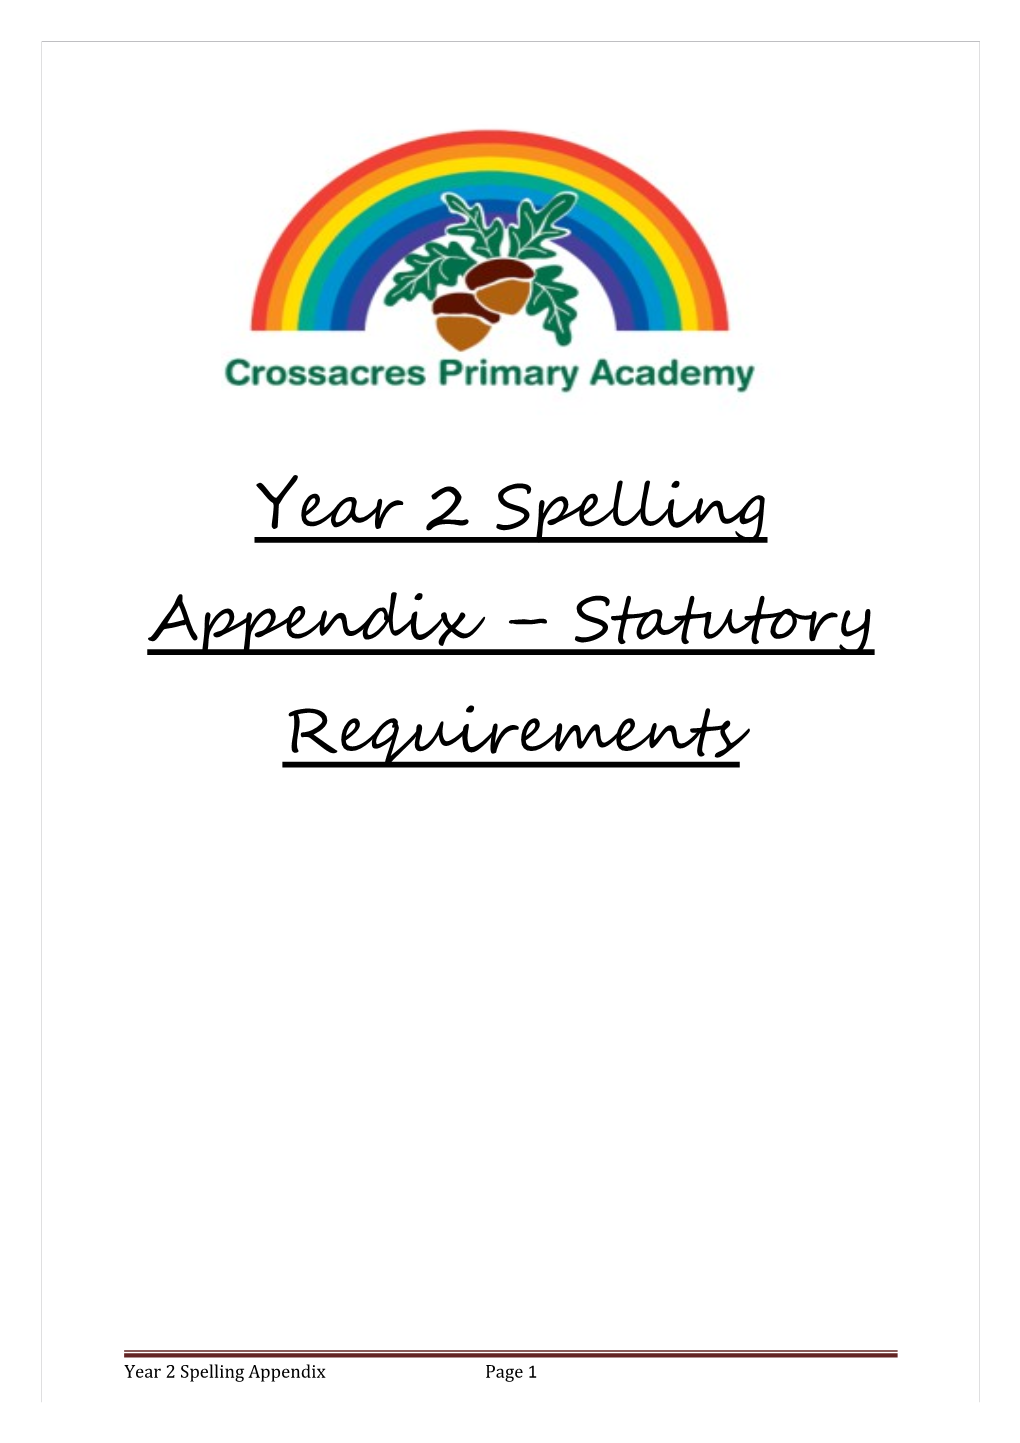 Year 2 Spelling Appendix Statutory Requirements